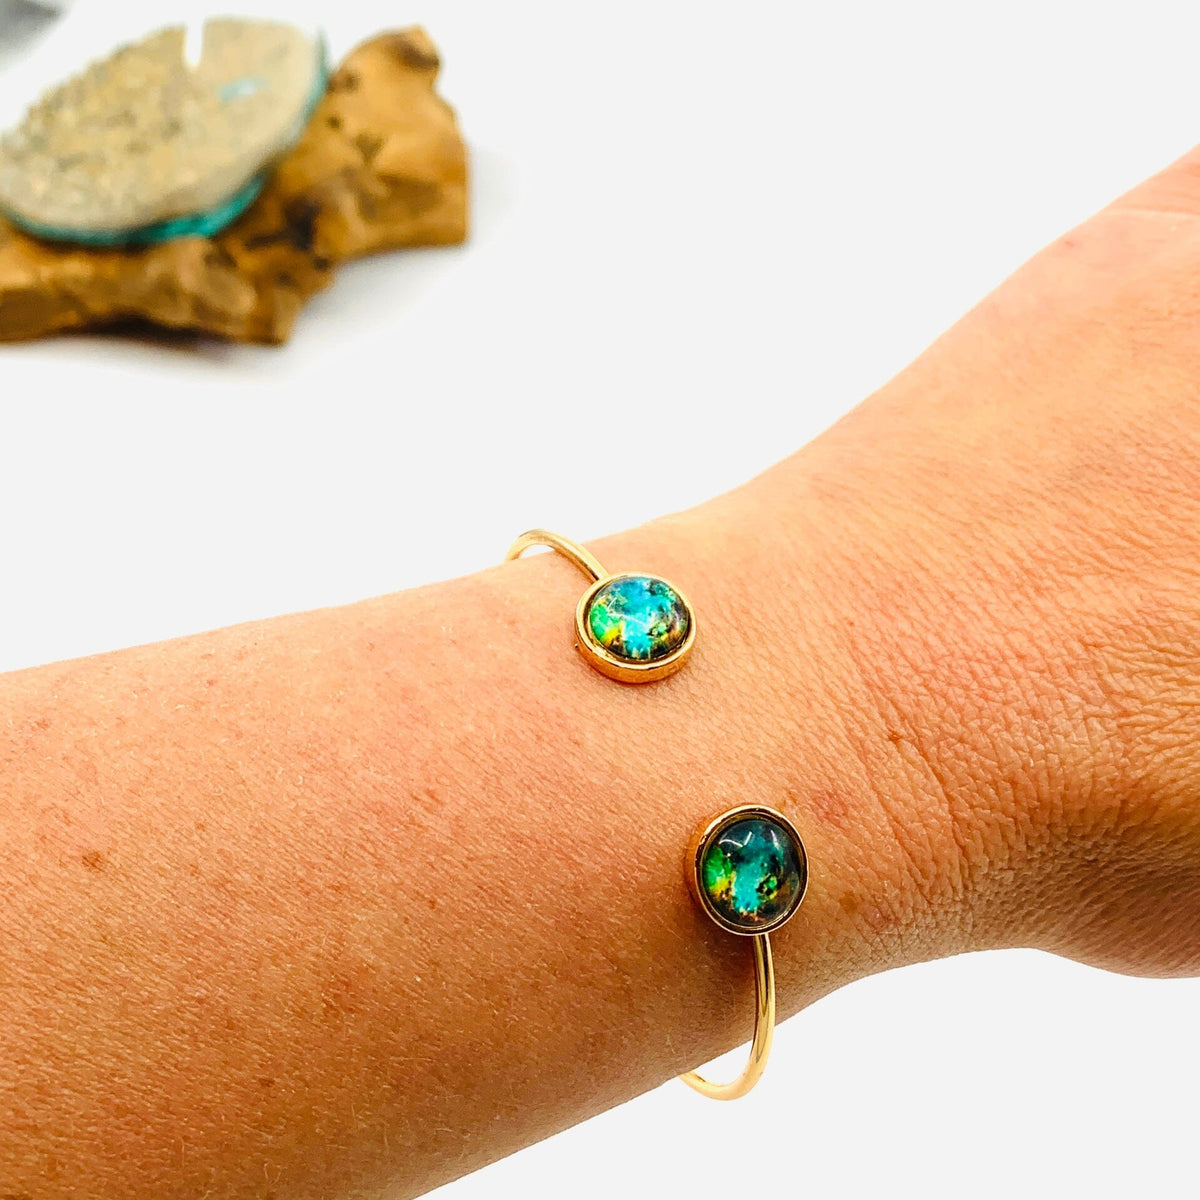 Galaxy Detail Cuff Bracelet, Gold Teal and Green Jewelry - 